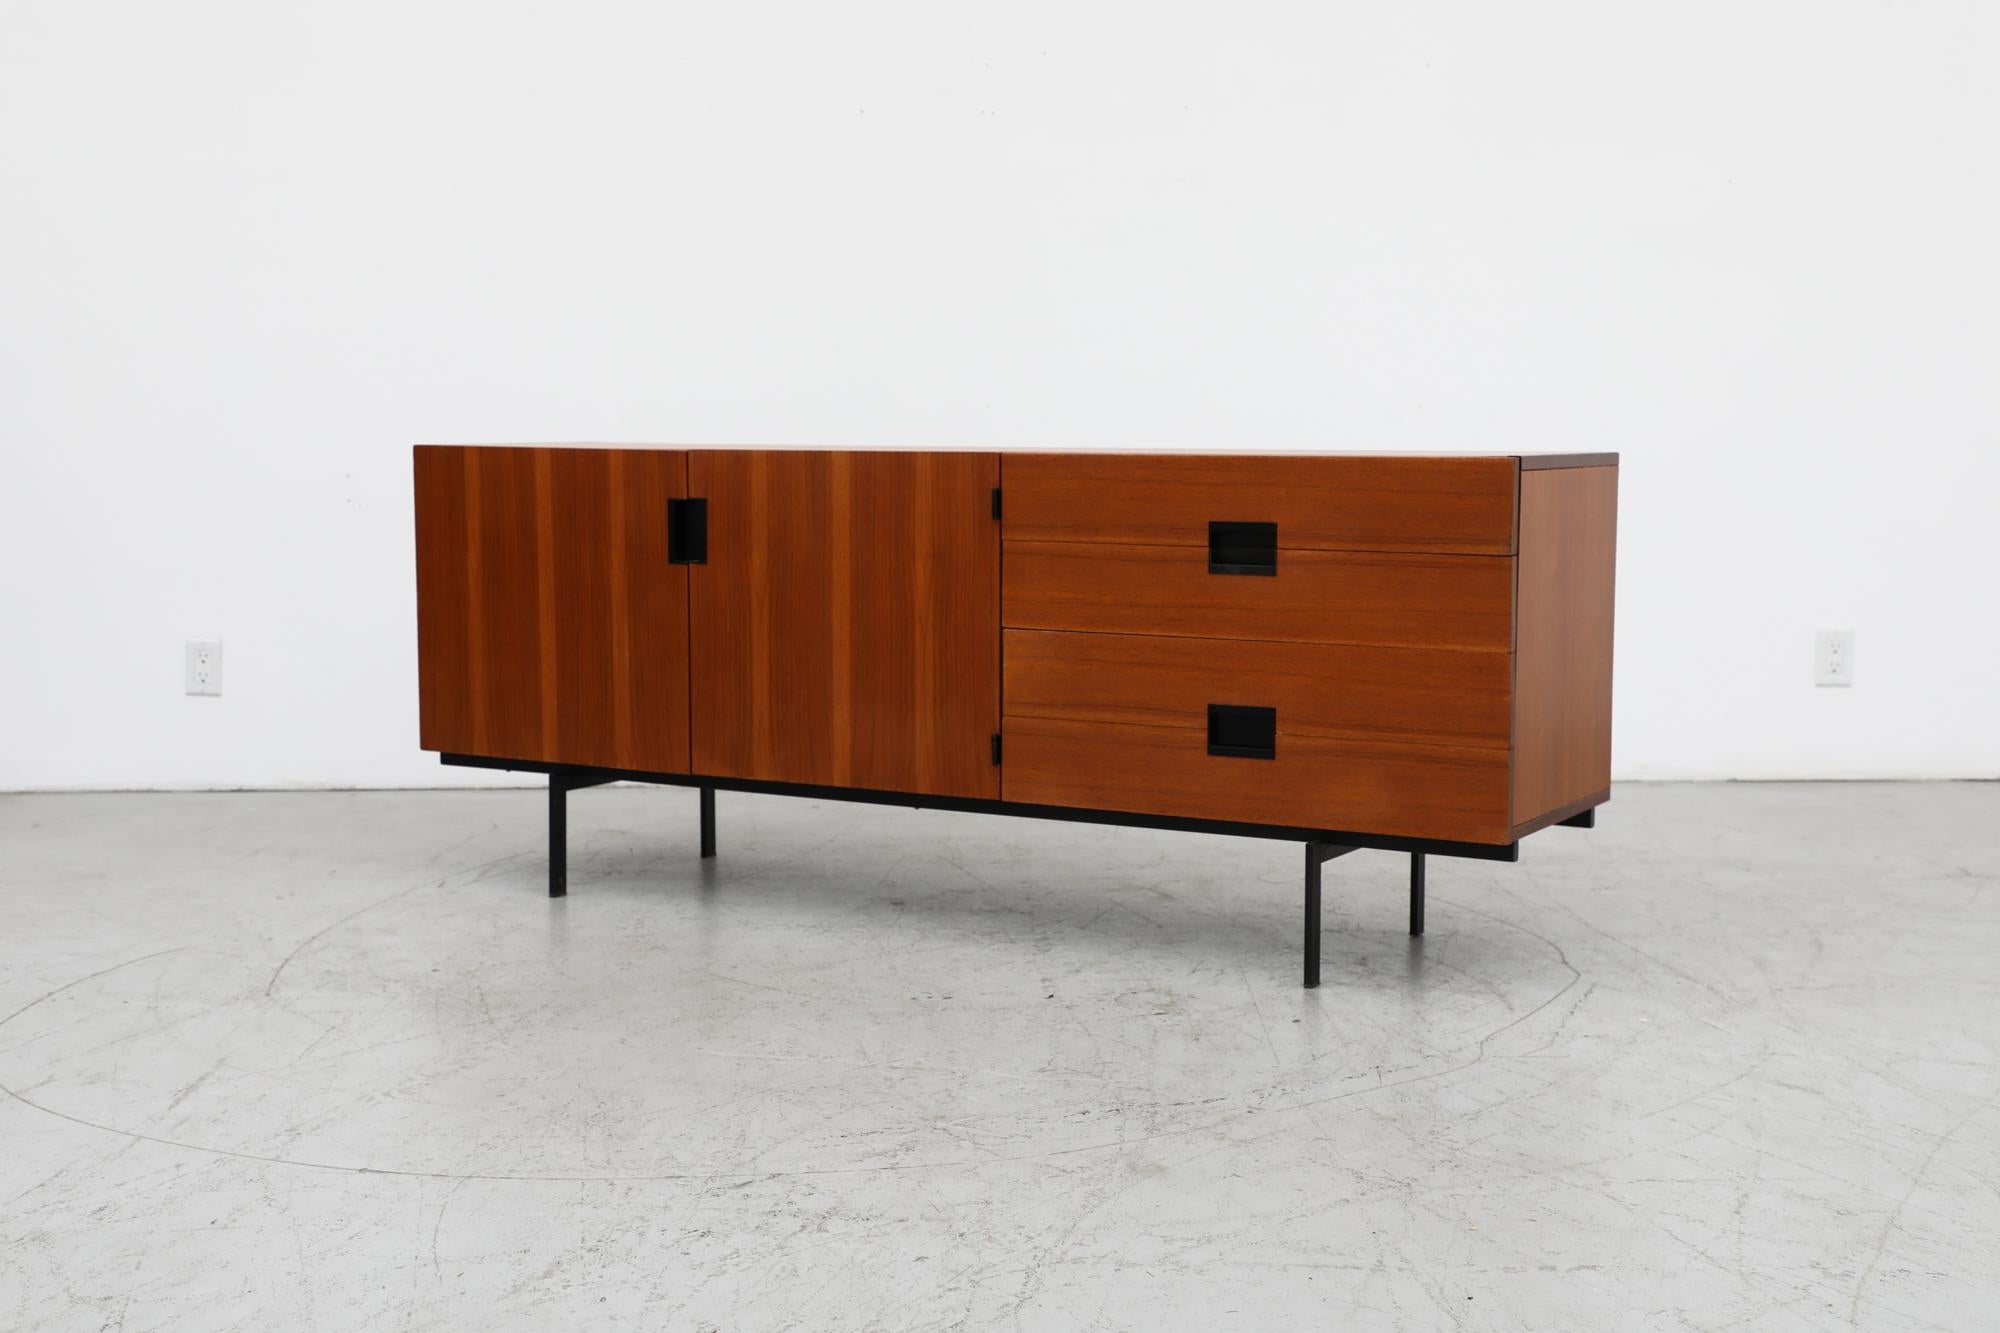 Teak Credenza with black enameled Model DU04 of the Japanese Series designed by Cees Braakman for Pastoe, 1958. This model has a delicate black enameled metal base, two cabinets and 4 stacked drawers with iconic inset handles and his signature